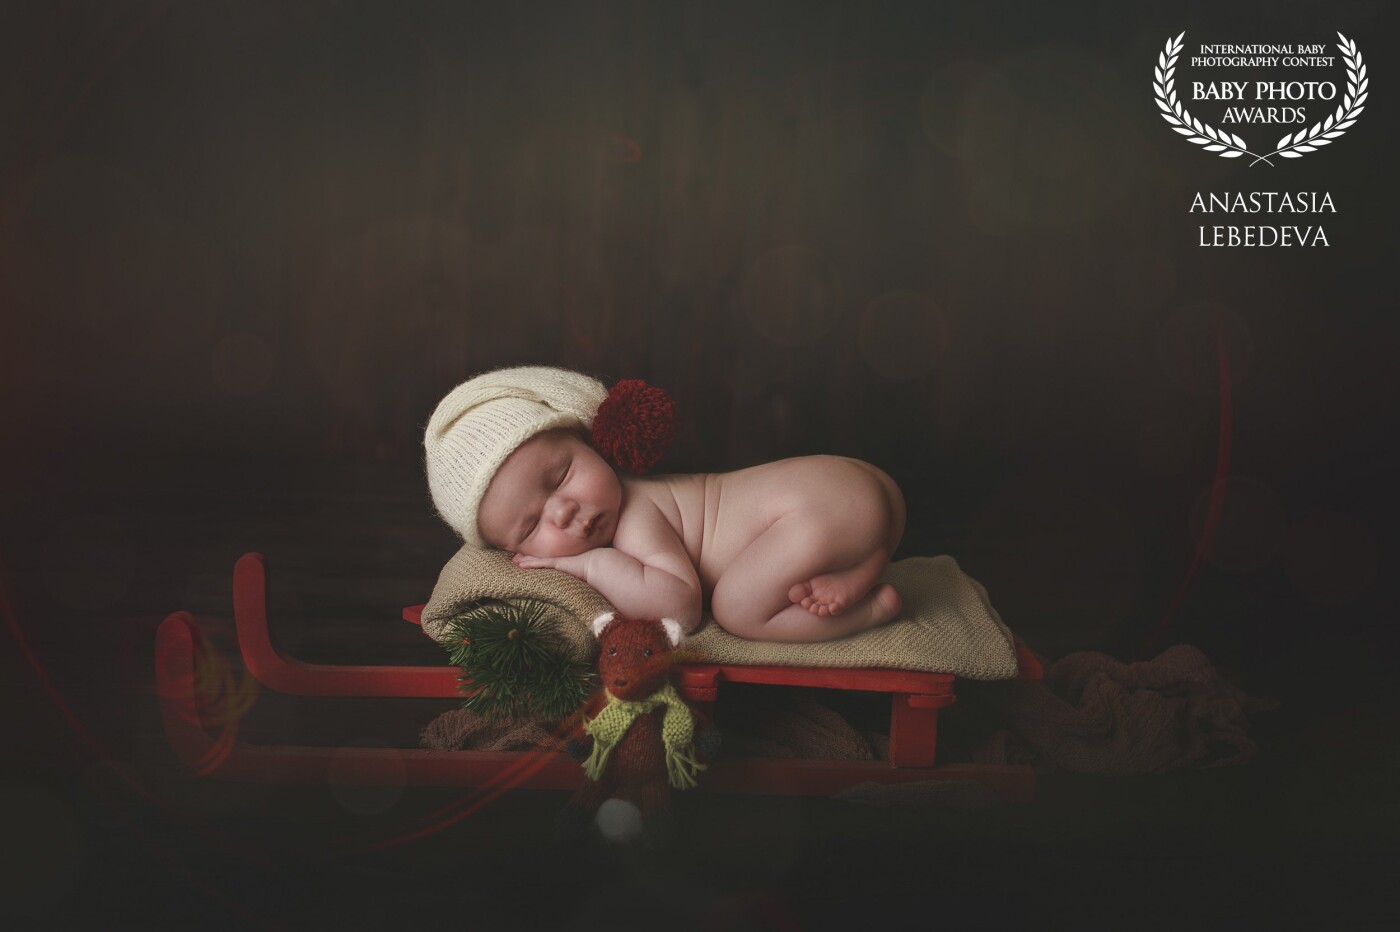 There's a newborn boy on the photo. He sleeps sweetly and dreams of gifts from Santa Claus. <br />
He has no idea that the most important gift for the New Year is he)